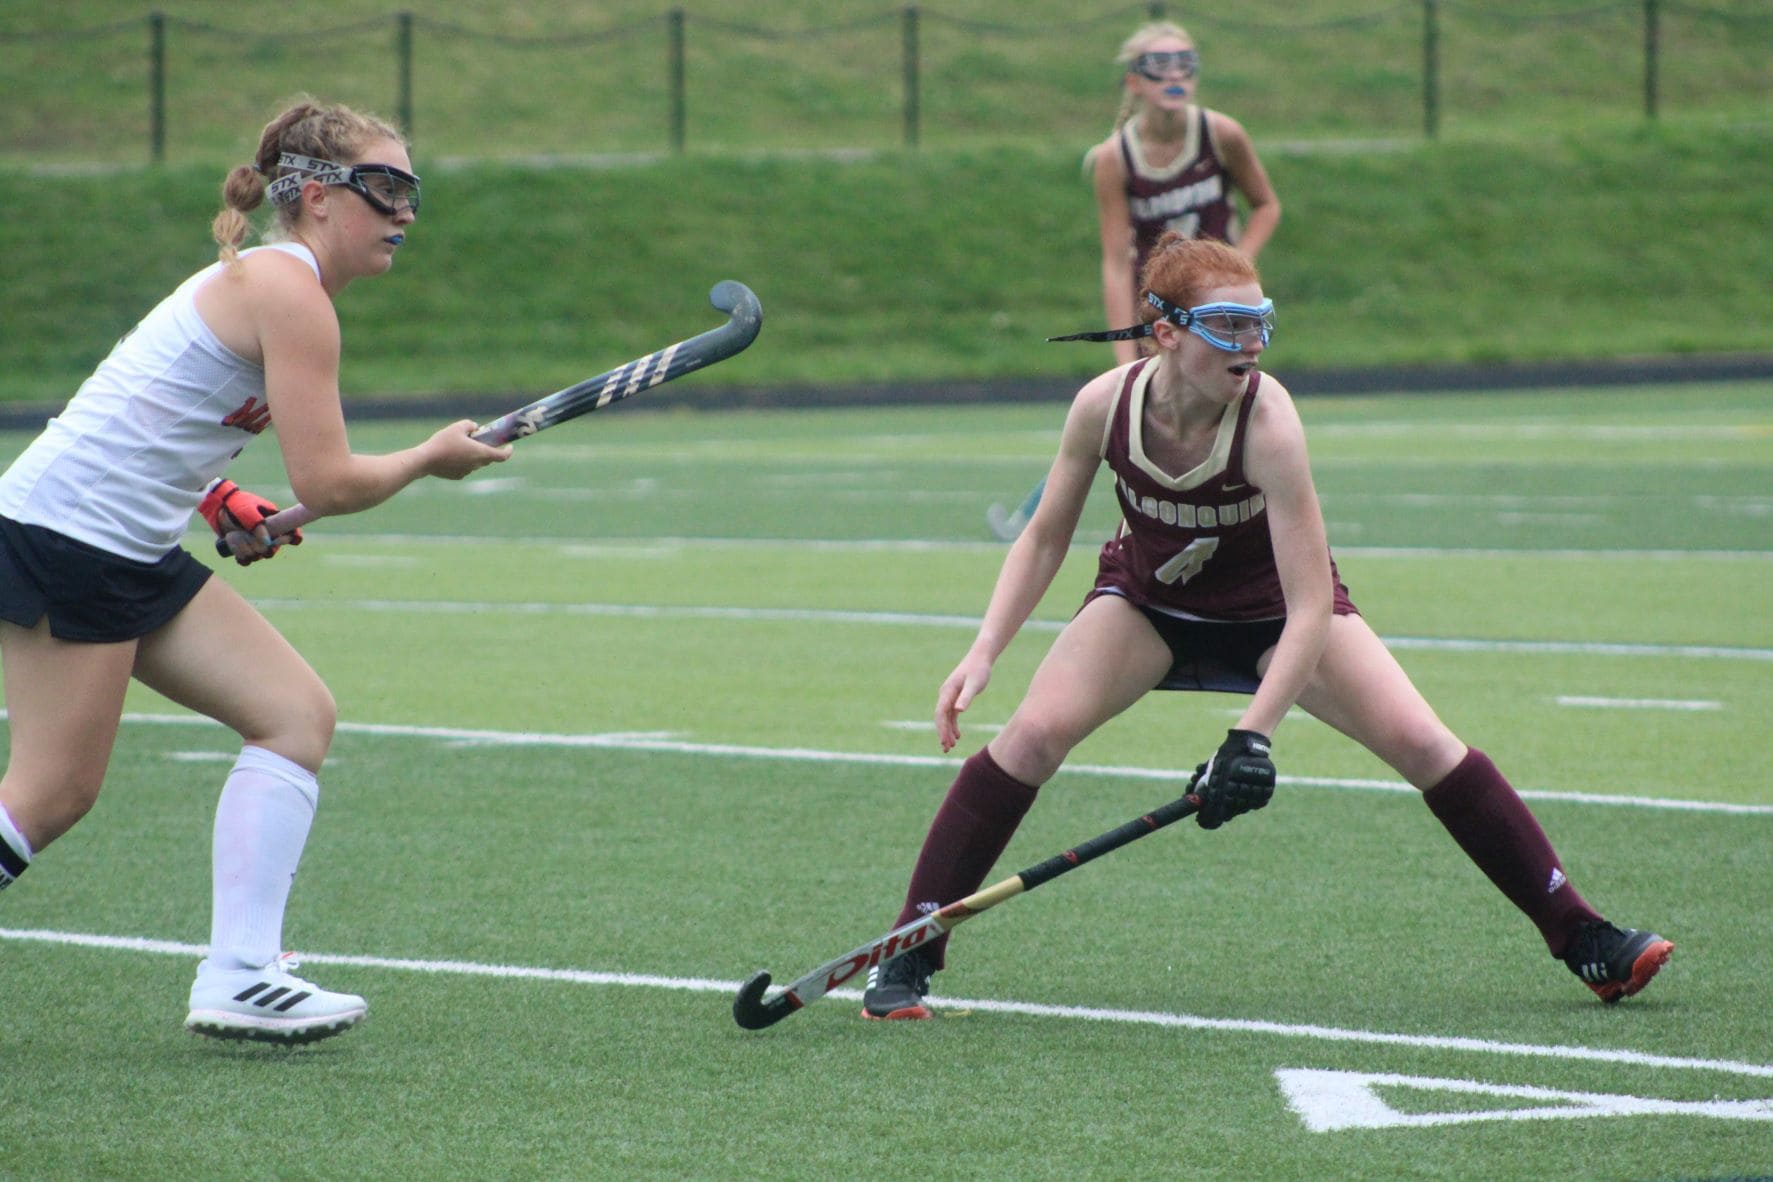 New field hockey coach takes the reins at Algonquin